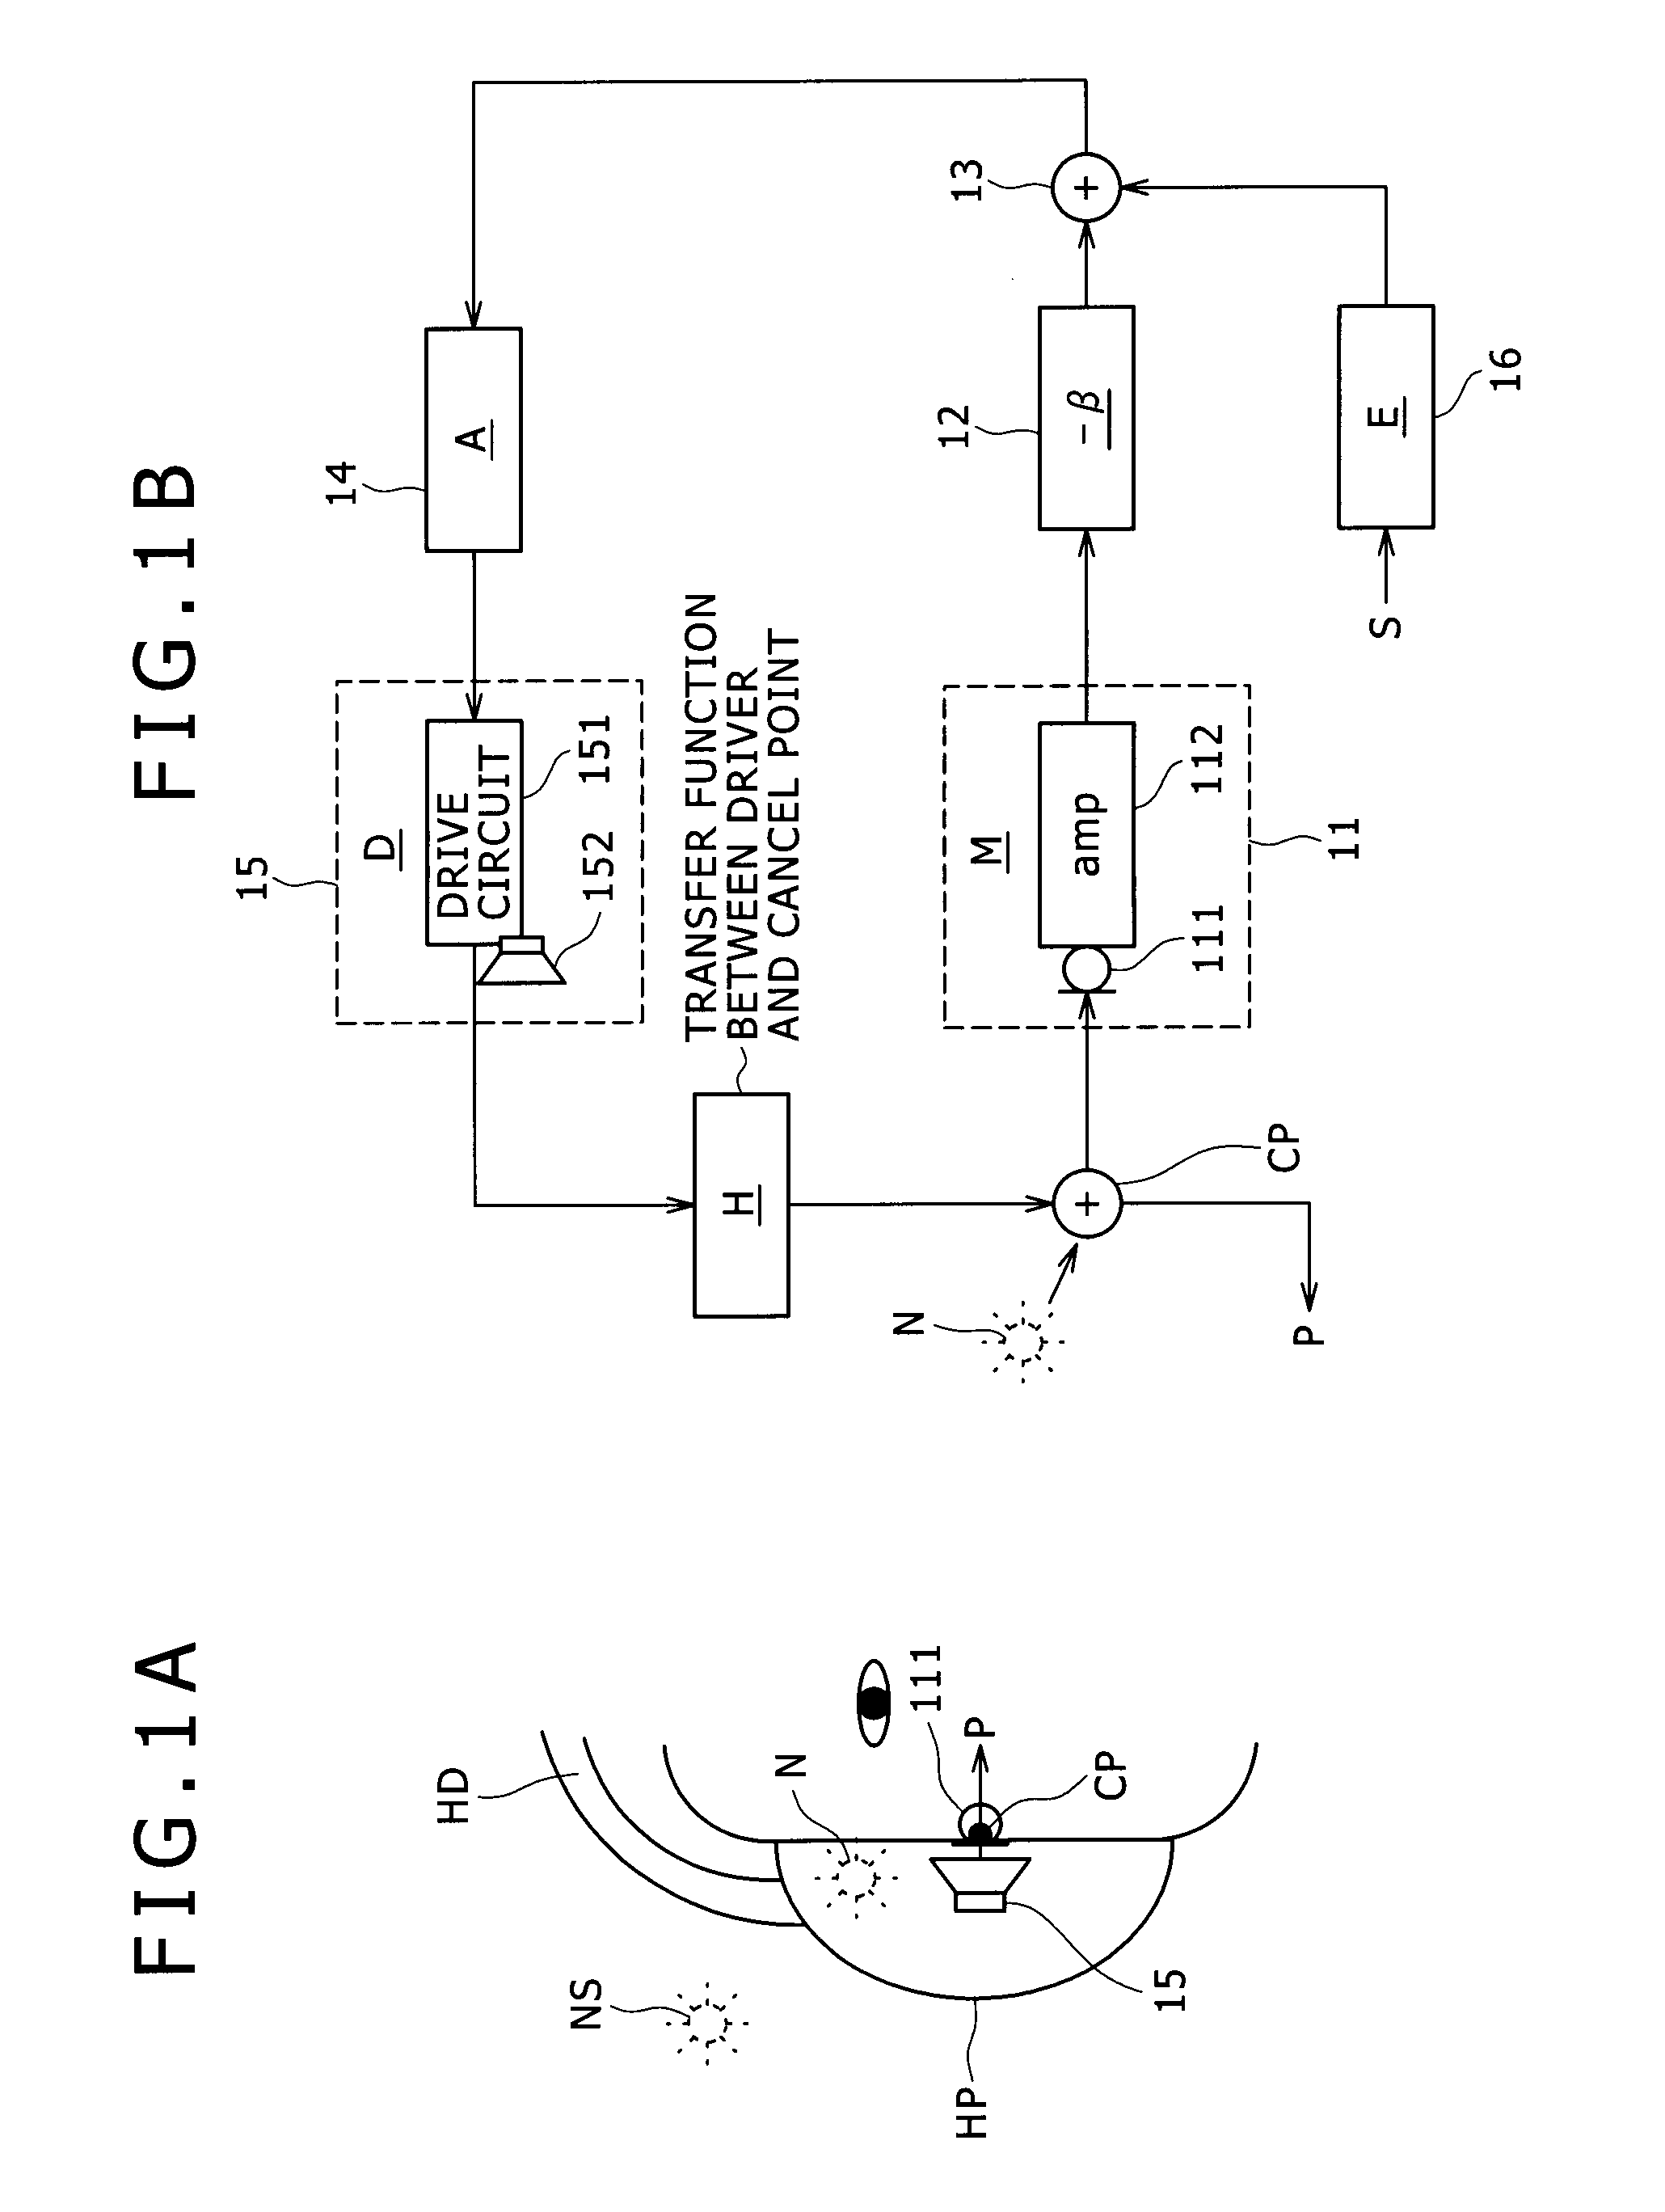 Filter circuit for noise cancellation, noise reduction signal production method and noise canceling system